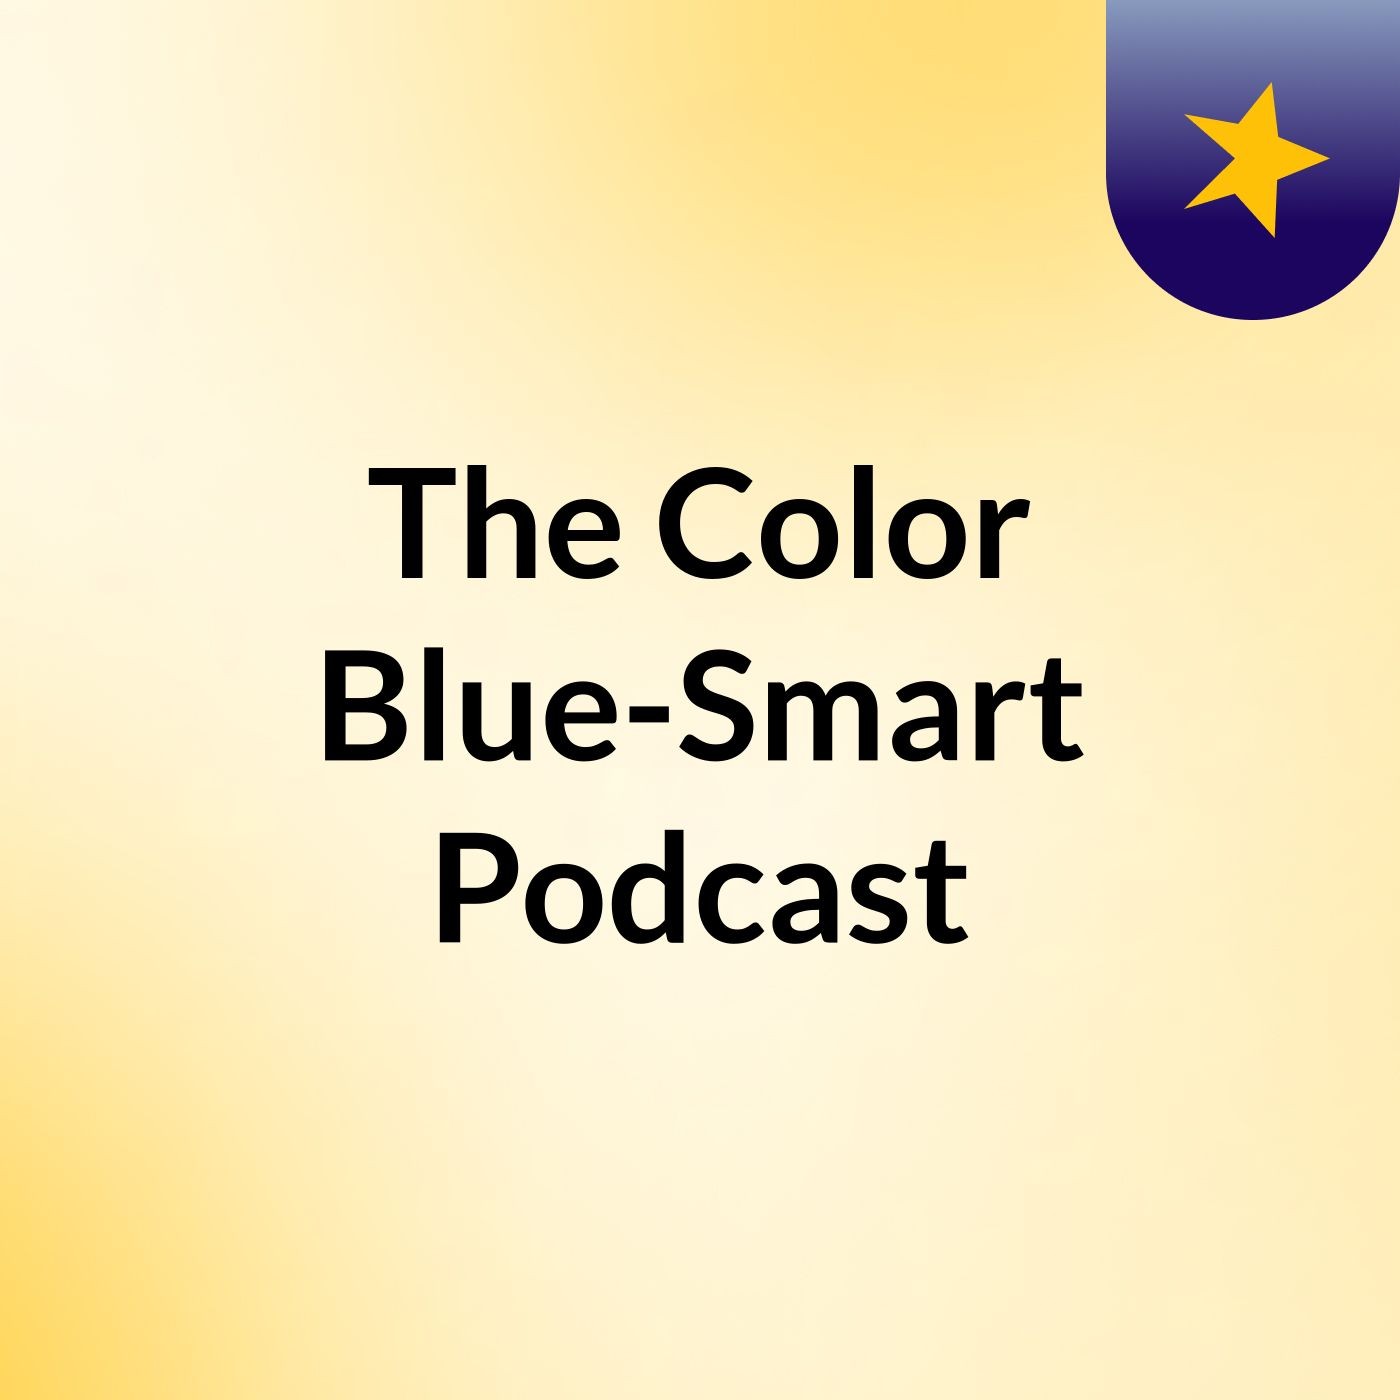 Closing- The Color Blue-Smart Podcast